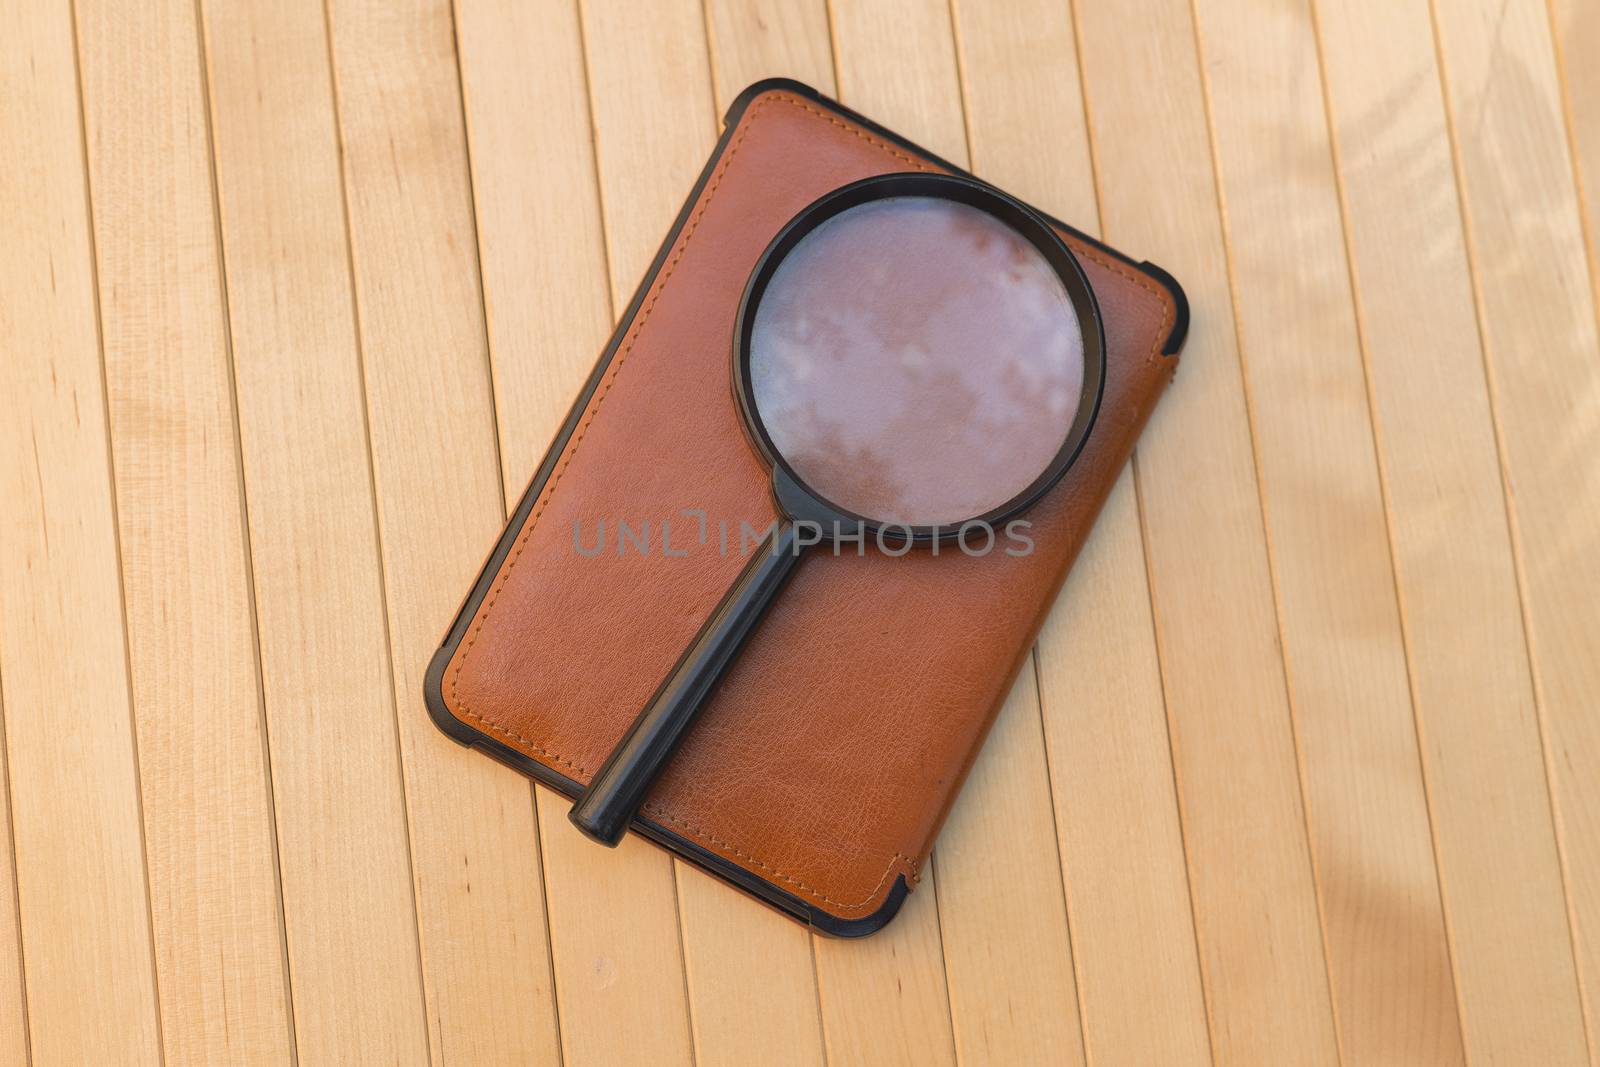 Magnifying glass on e-book on wooden background by boys1983@mail.ru